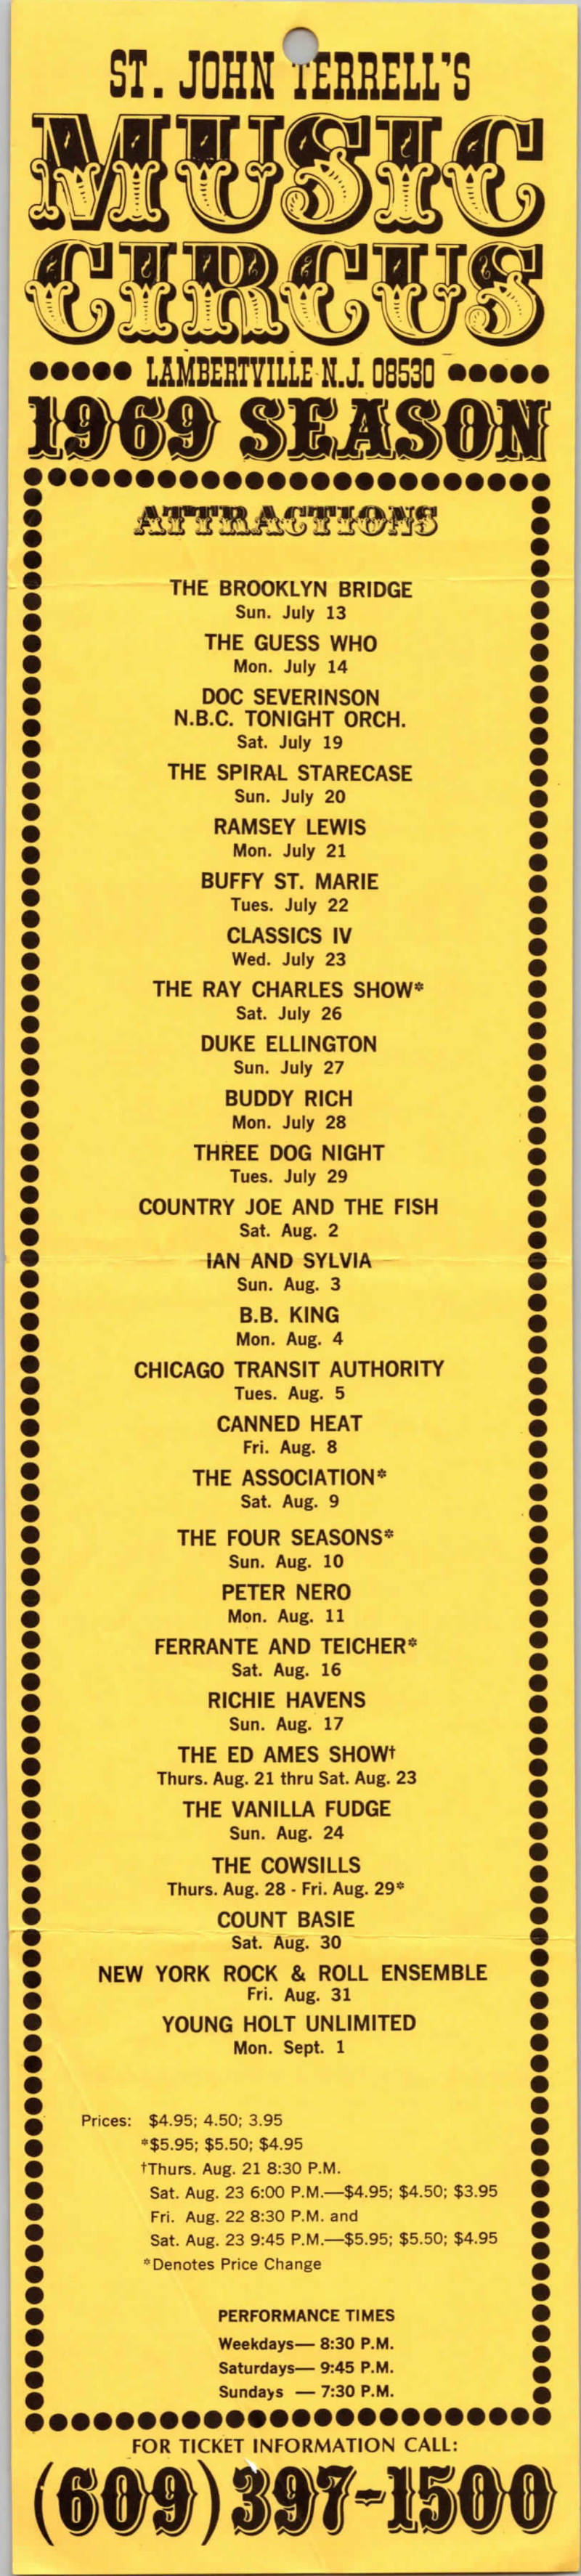 1969 Schedule Printed as a Flyer - Front